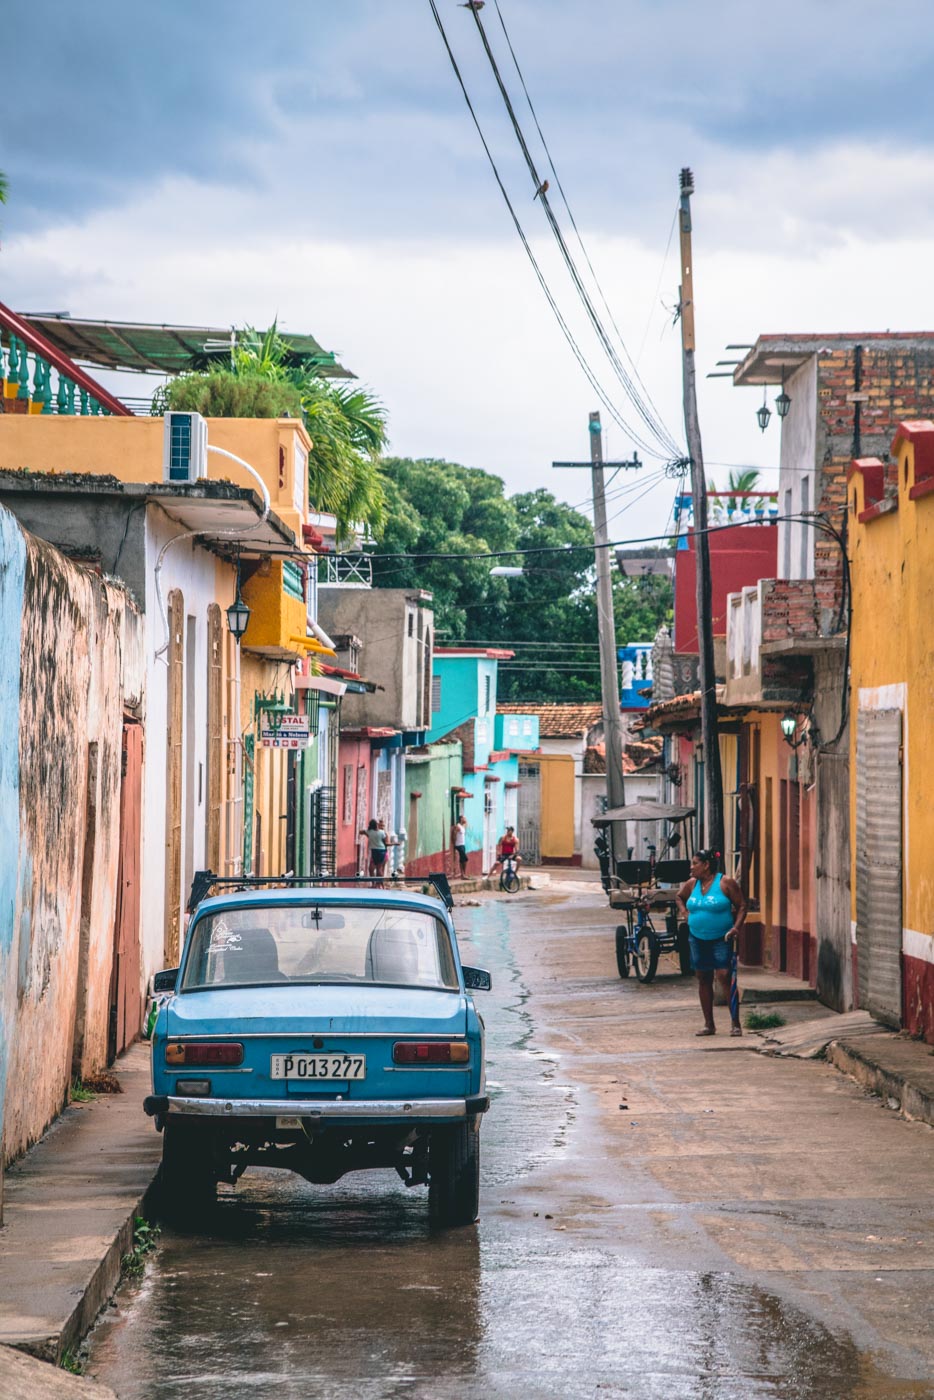 The Ultimate Cuba Itinerary: Things to do in Cuba on Your Next Vacation